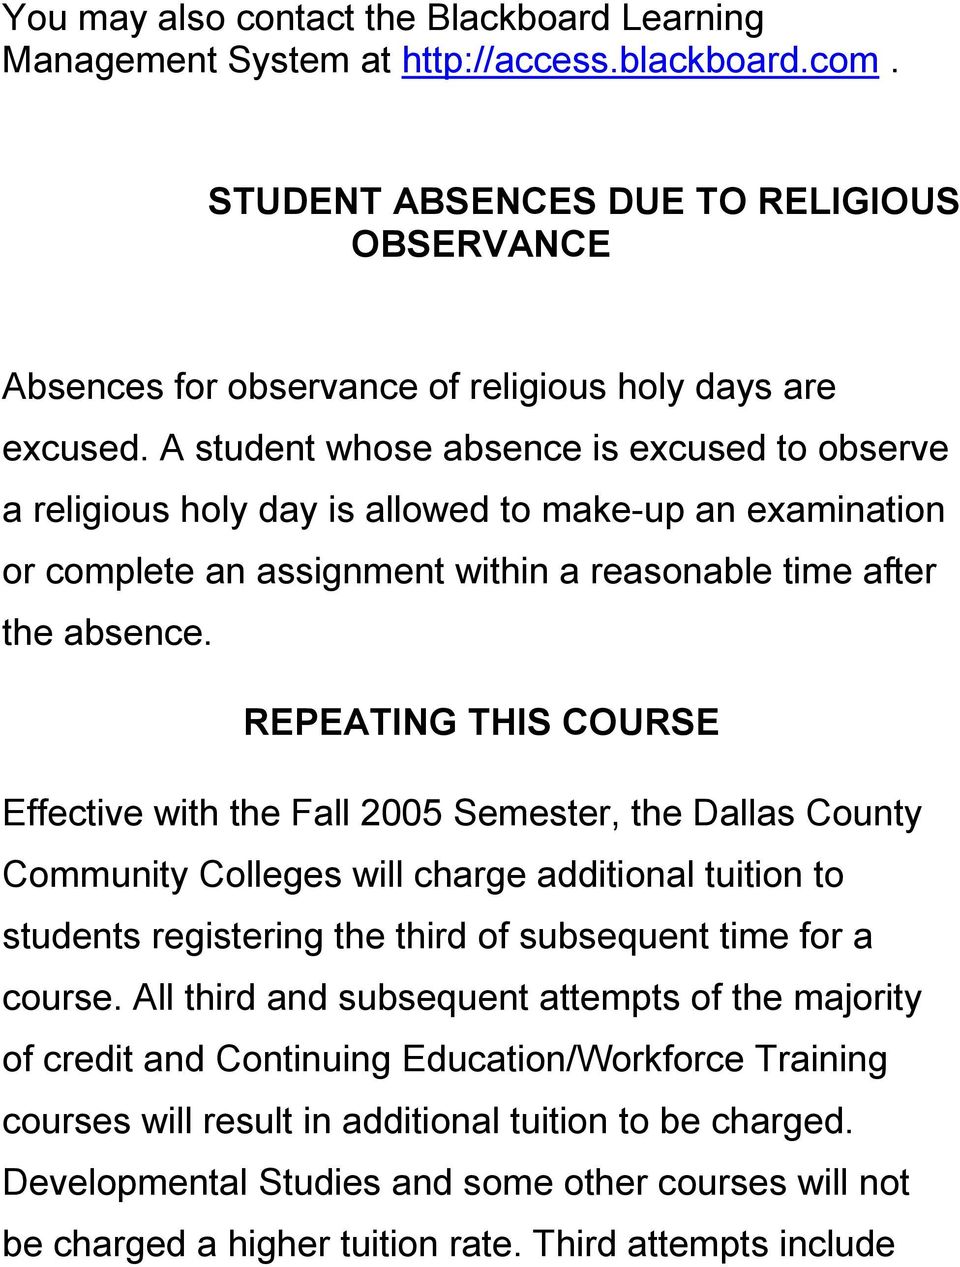 REPEATING THIS COURSE Effective with the Fall 2005 Semester, the Dallas County Community Colleges will charge additional tuition to students registering the third of subsequent time for a course.